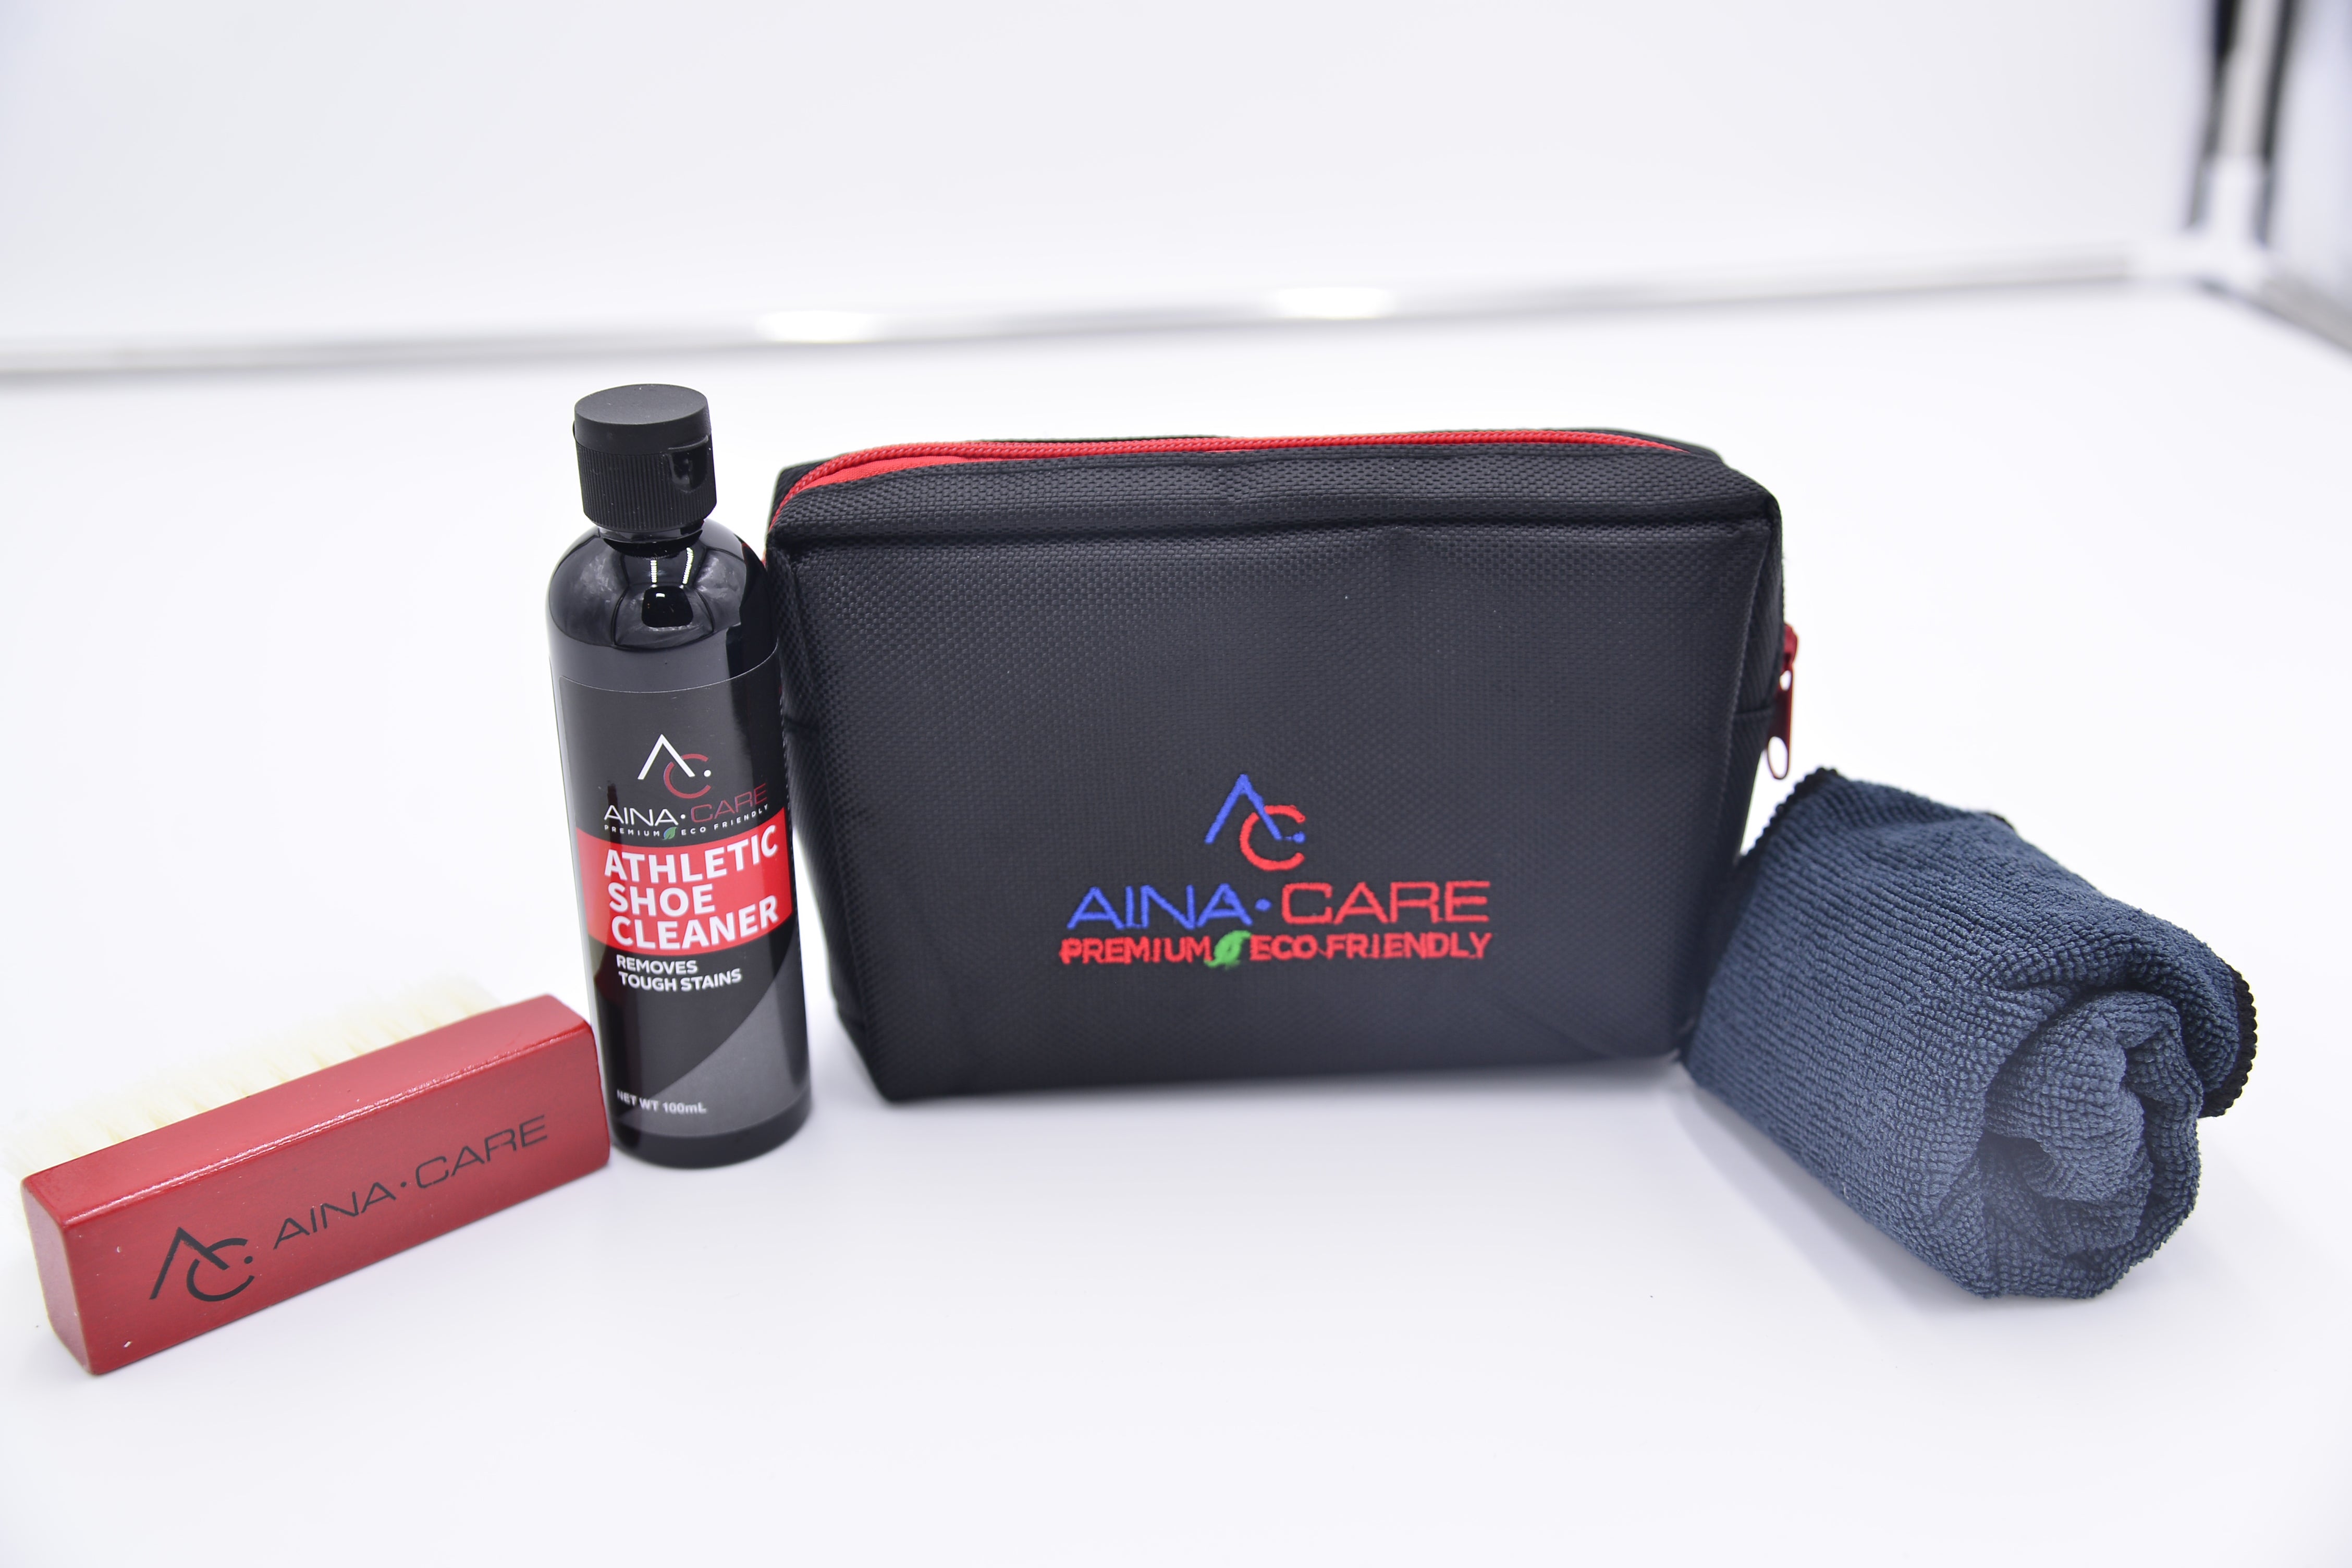 Everything in the Silver Shoe Care laid out on a table. Products include Athletic Shoe Cleaner, microfiber cloth, soft brush, and black travel bag.